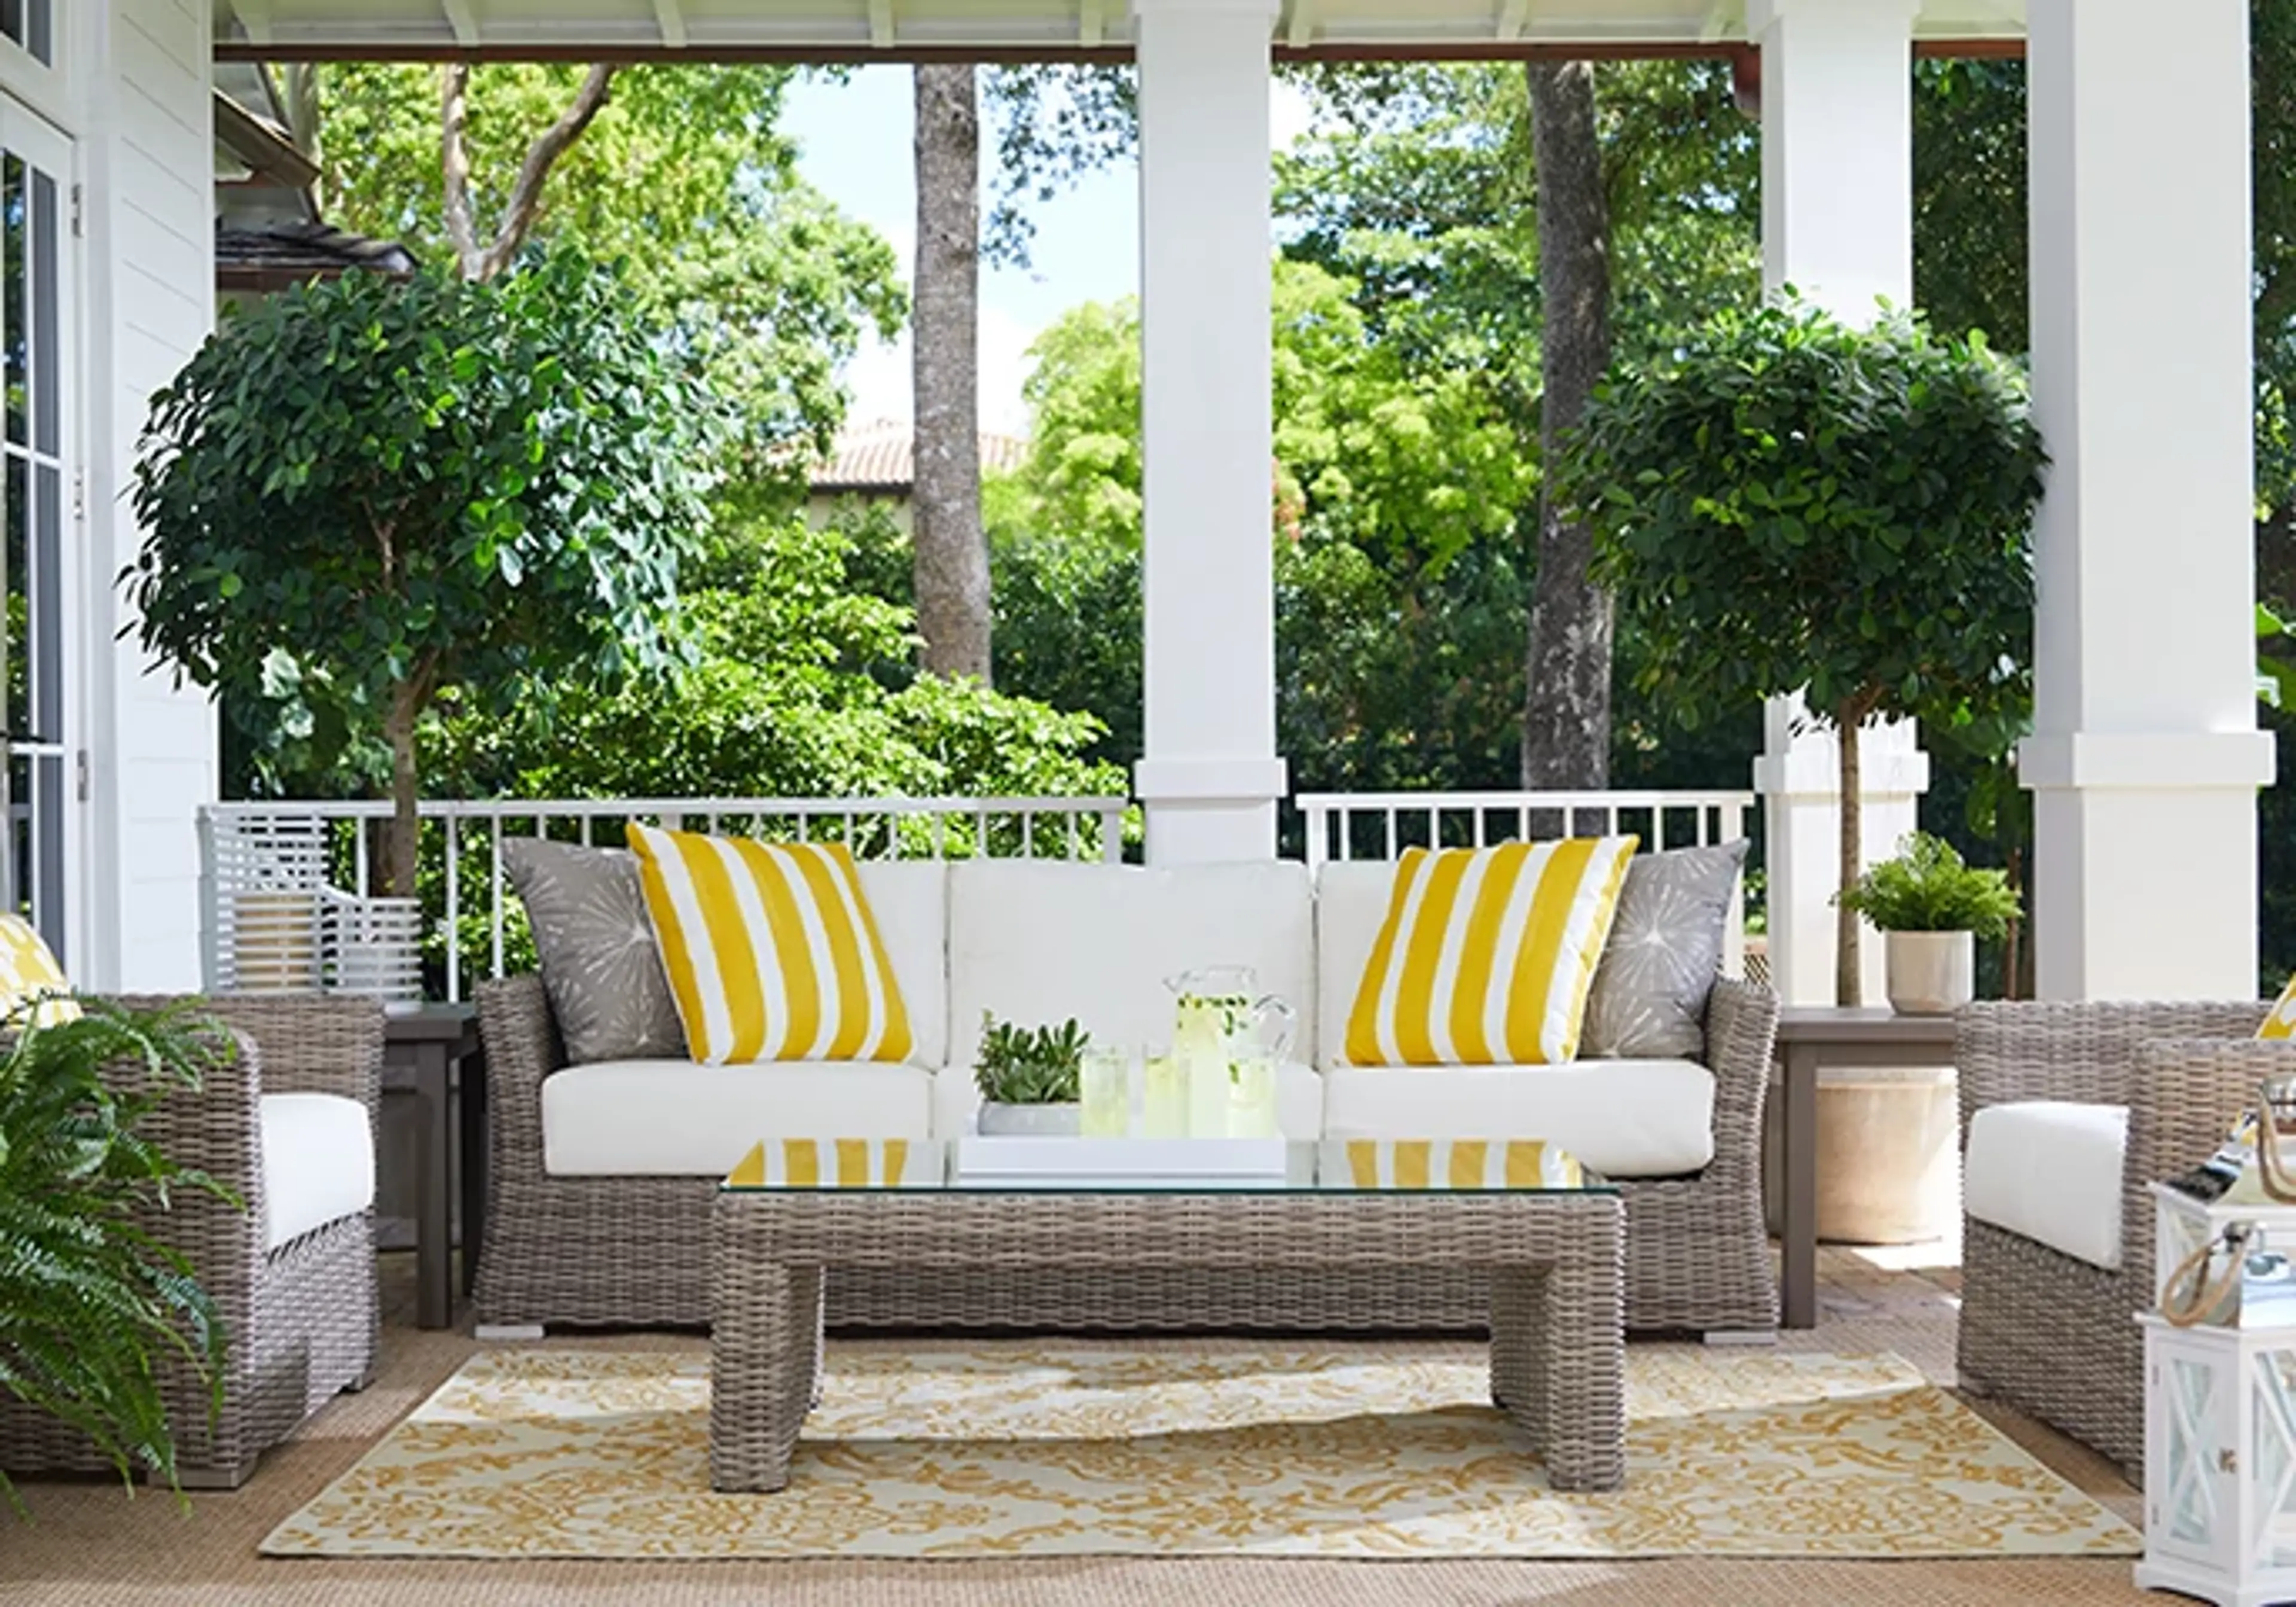 The Perfect Front Porch Design: 6 Tips On Creating A Warm And Welcoming Space 